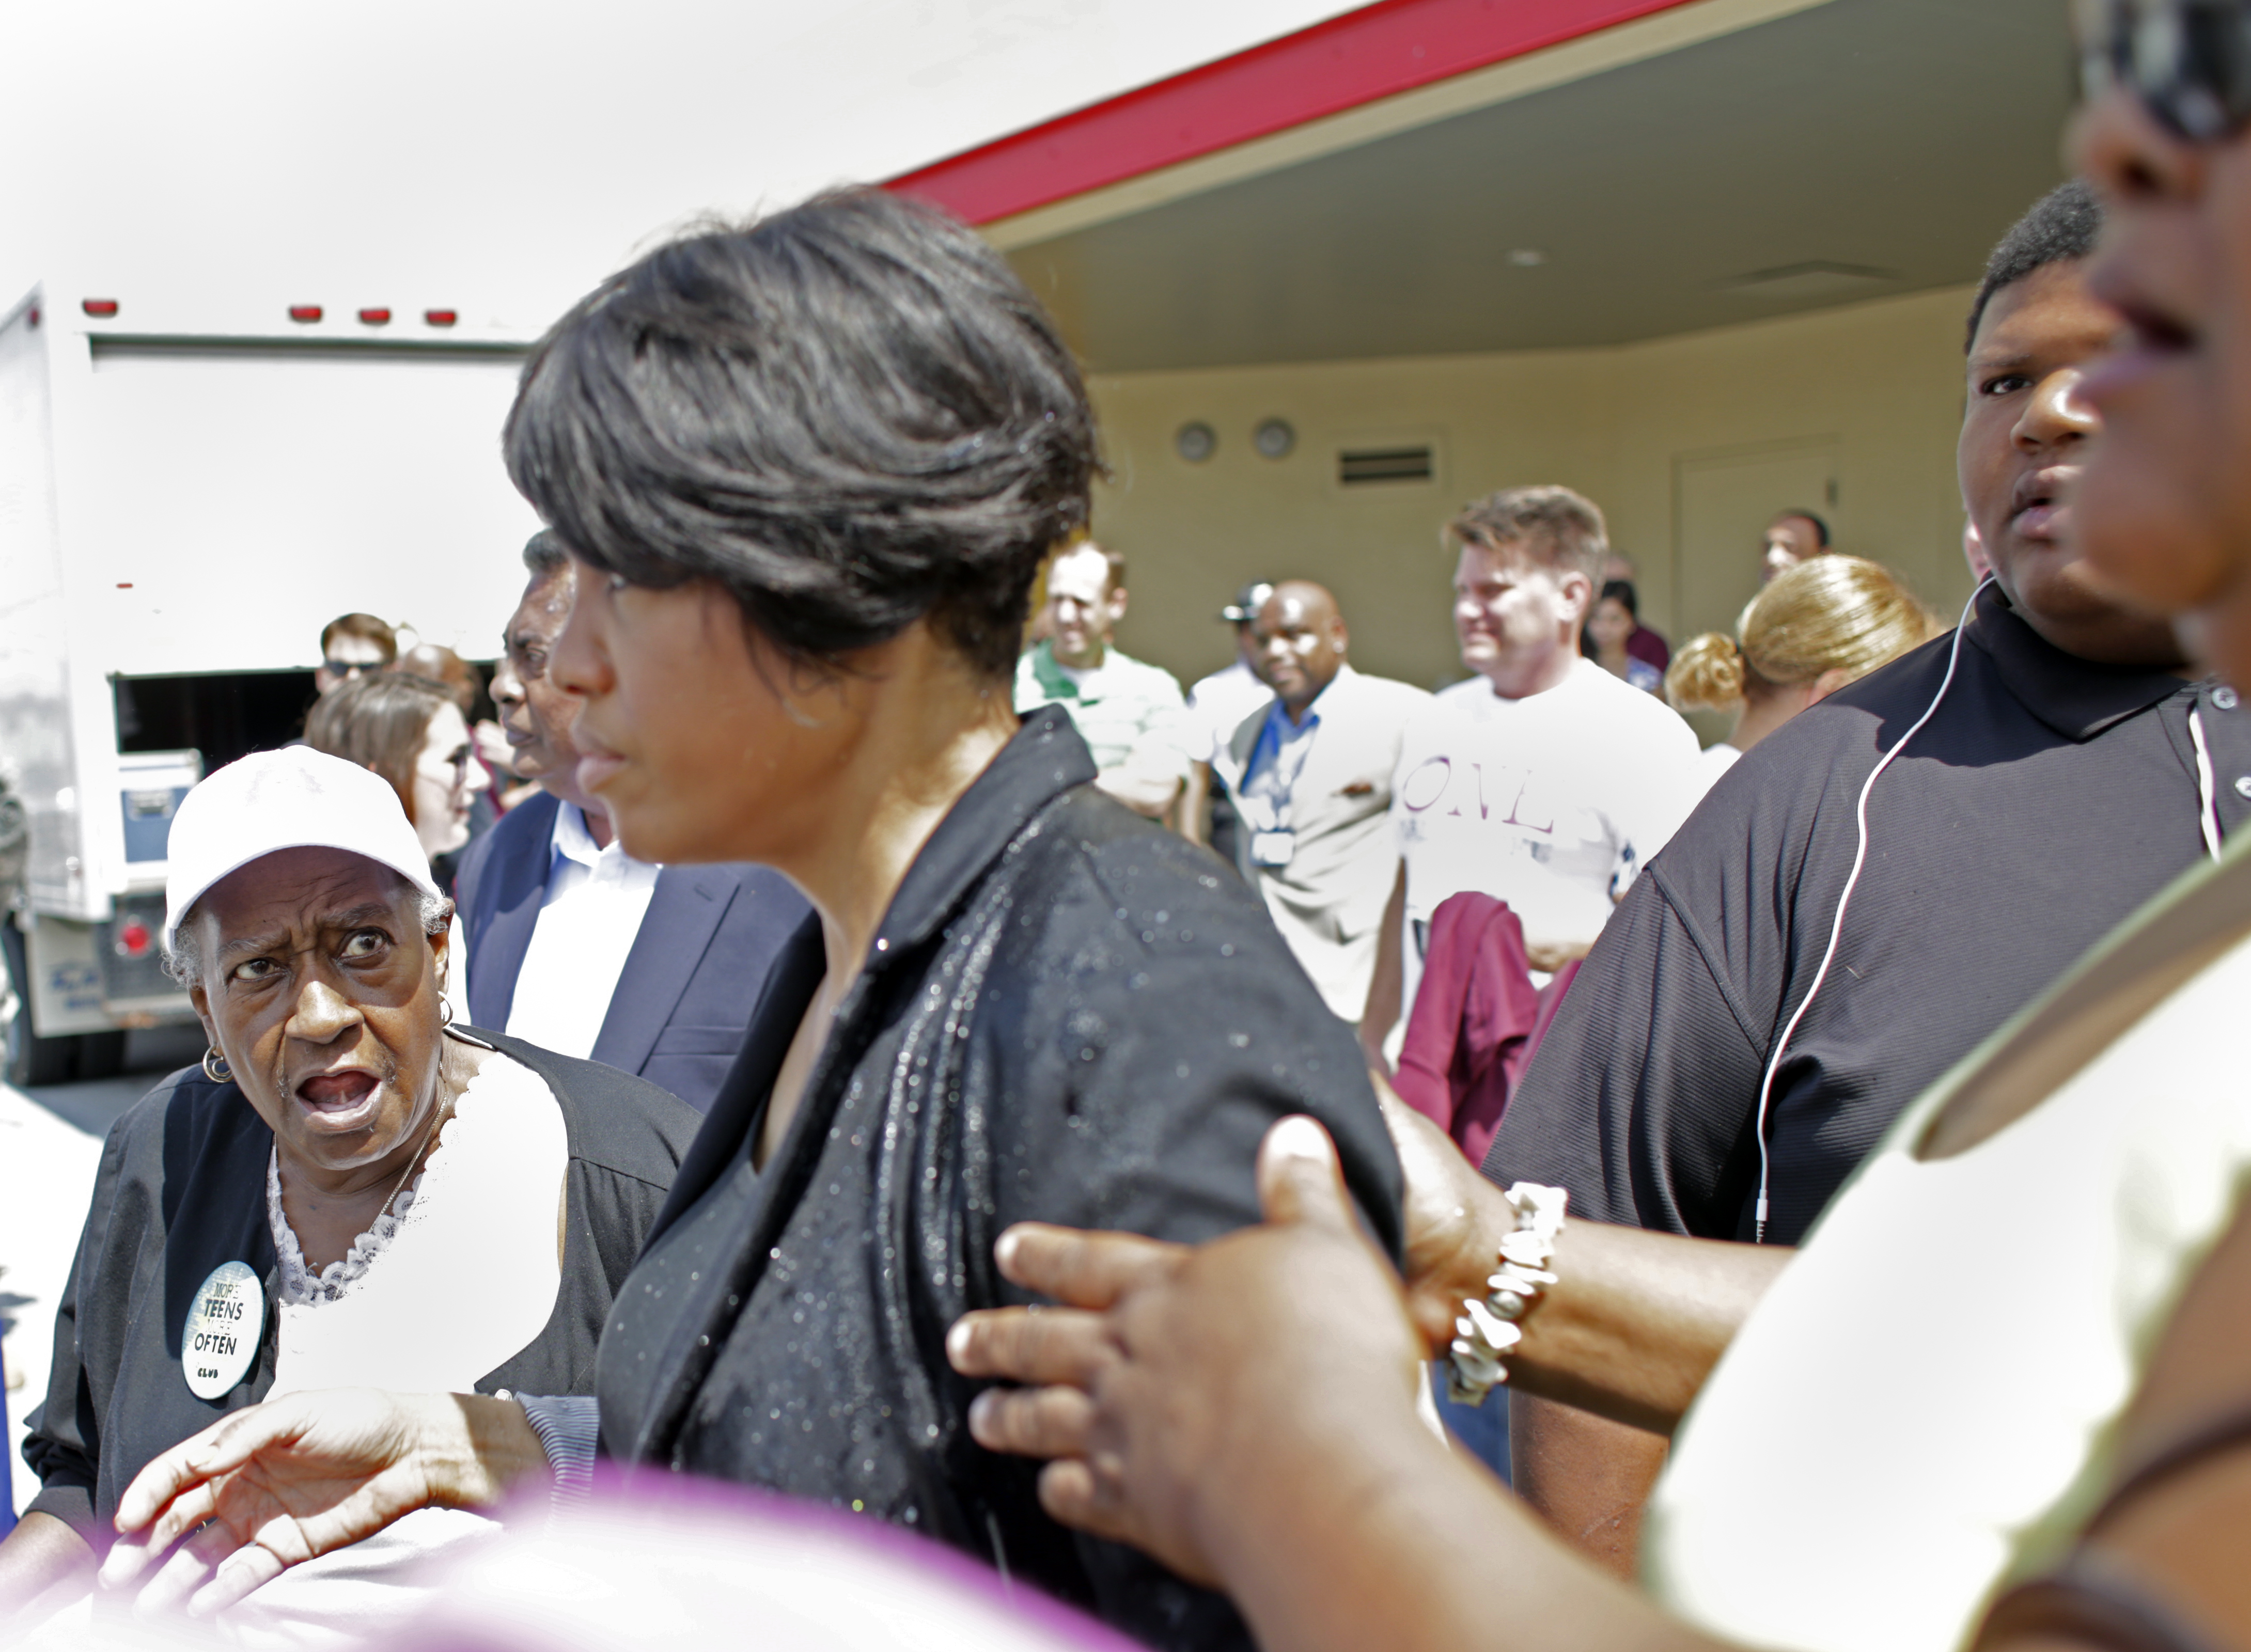 Baltimore, MD - 07/11/15 - Mayor Stephanie Rawlings-Blake has water dumped on her after speaking at the Mondawmin mall Tom Brenner / The Baltimore Sun.